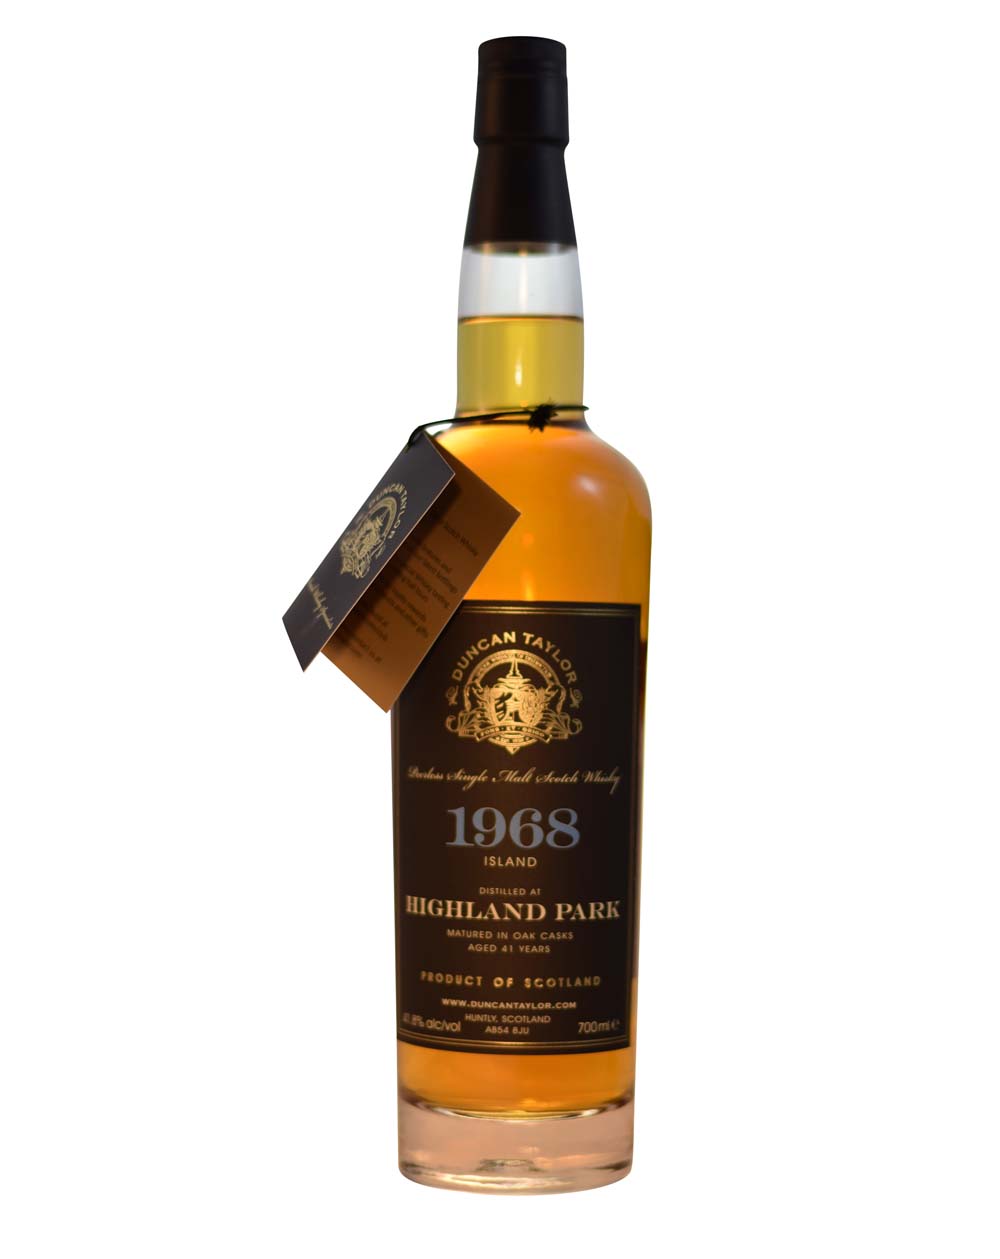 Highland Park 1968 Cask Strength 41 Years Old Duncan Taylor Musthave Malts MHM